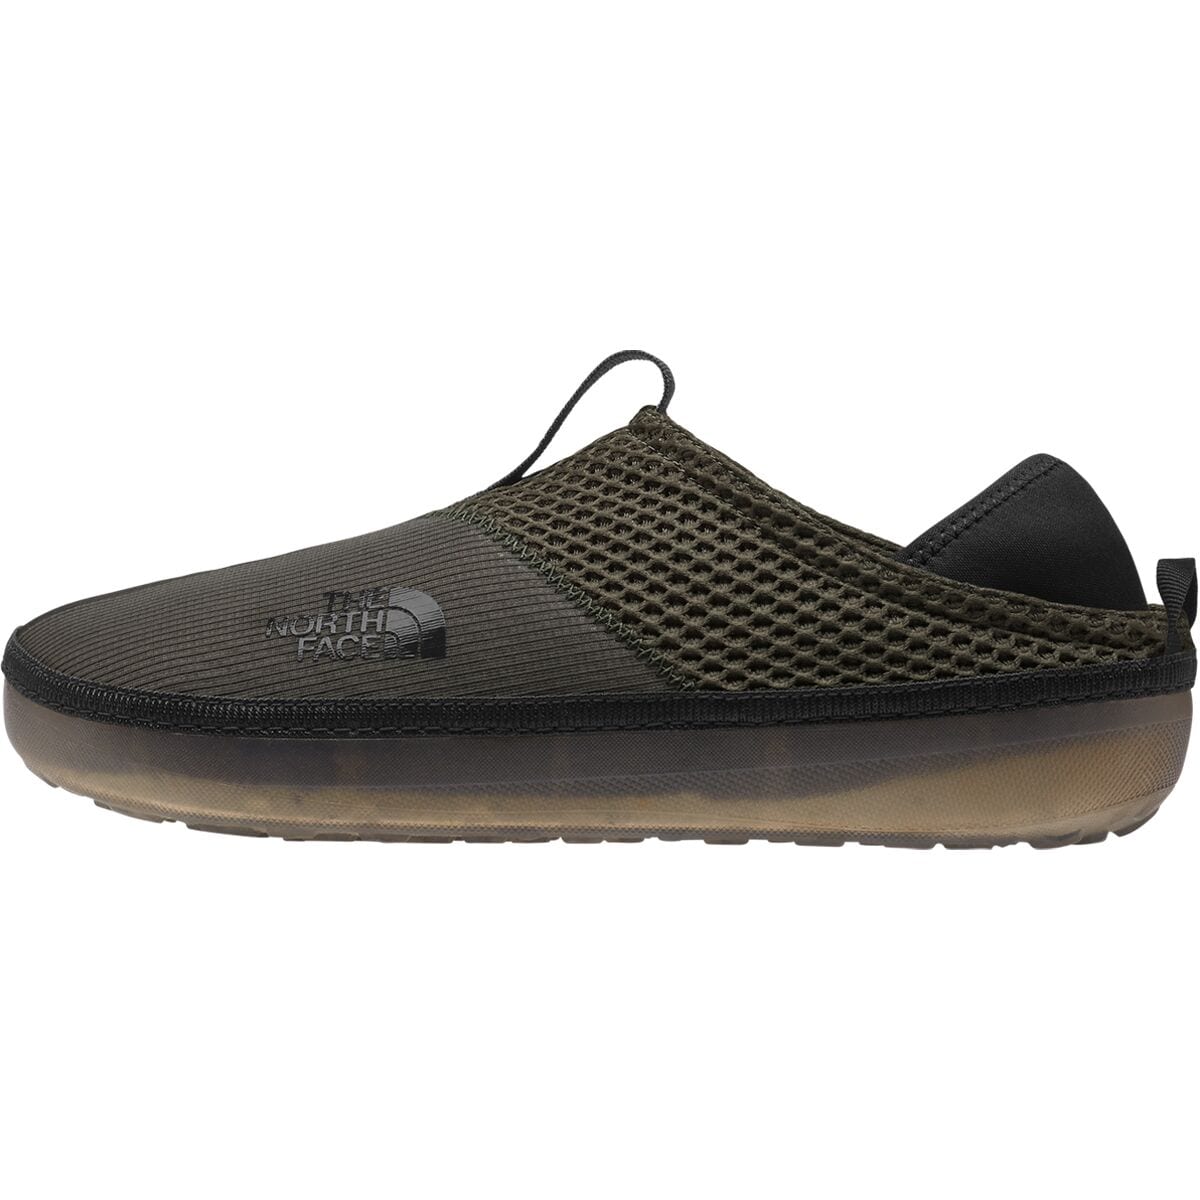 Base Camp Mule Shoe by The North Face | US-Parks.com